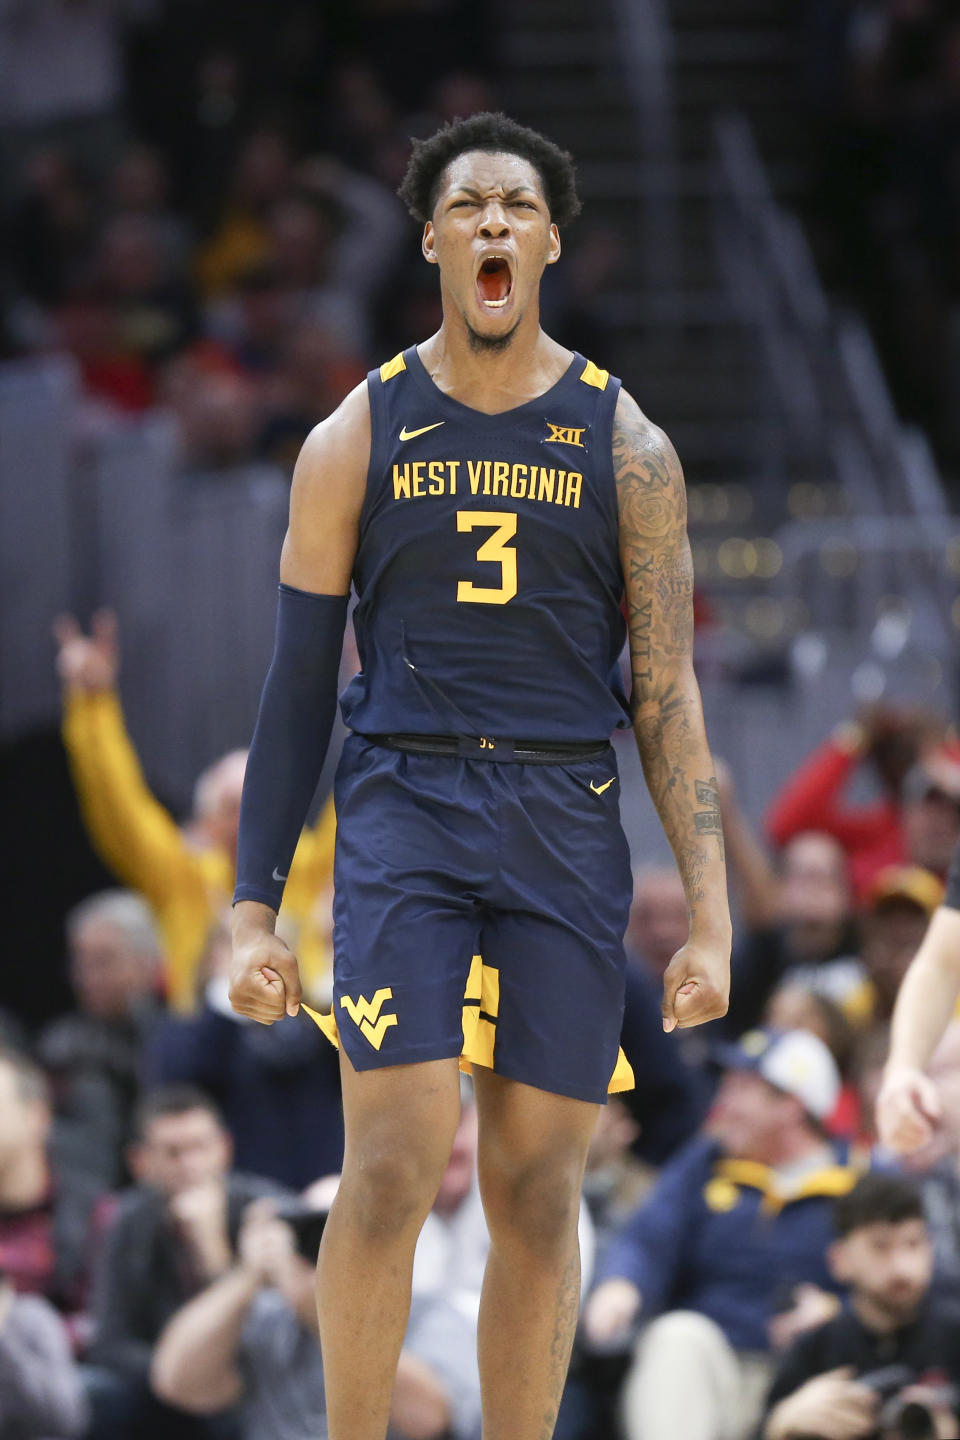 West Virginia's Gabe Osabuohien celebrates during the second half of an NCAA college basketball game against Ohio State Sunday, Dec. 29, 2019, in Cleveland. West Virginia defeated Ohio State 67-59. (AP Photo/Ron Schwane)